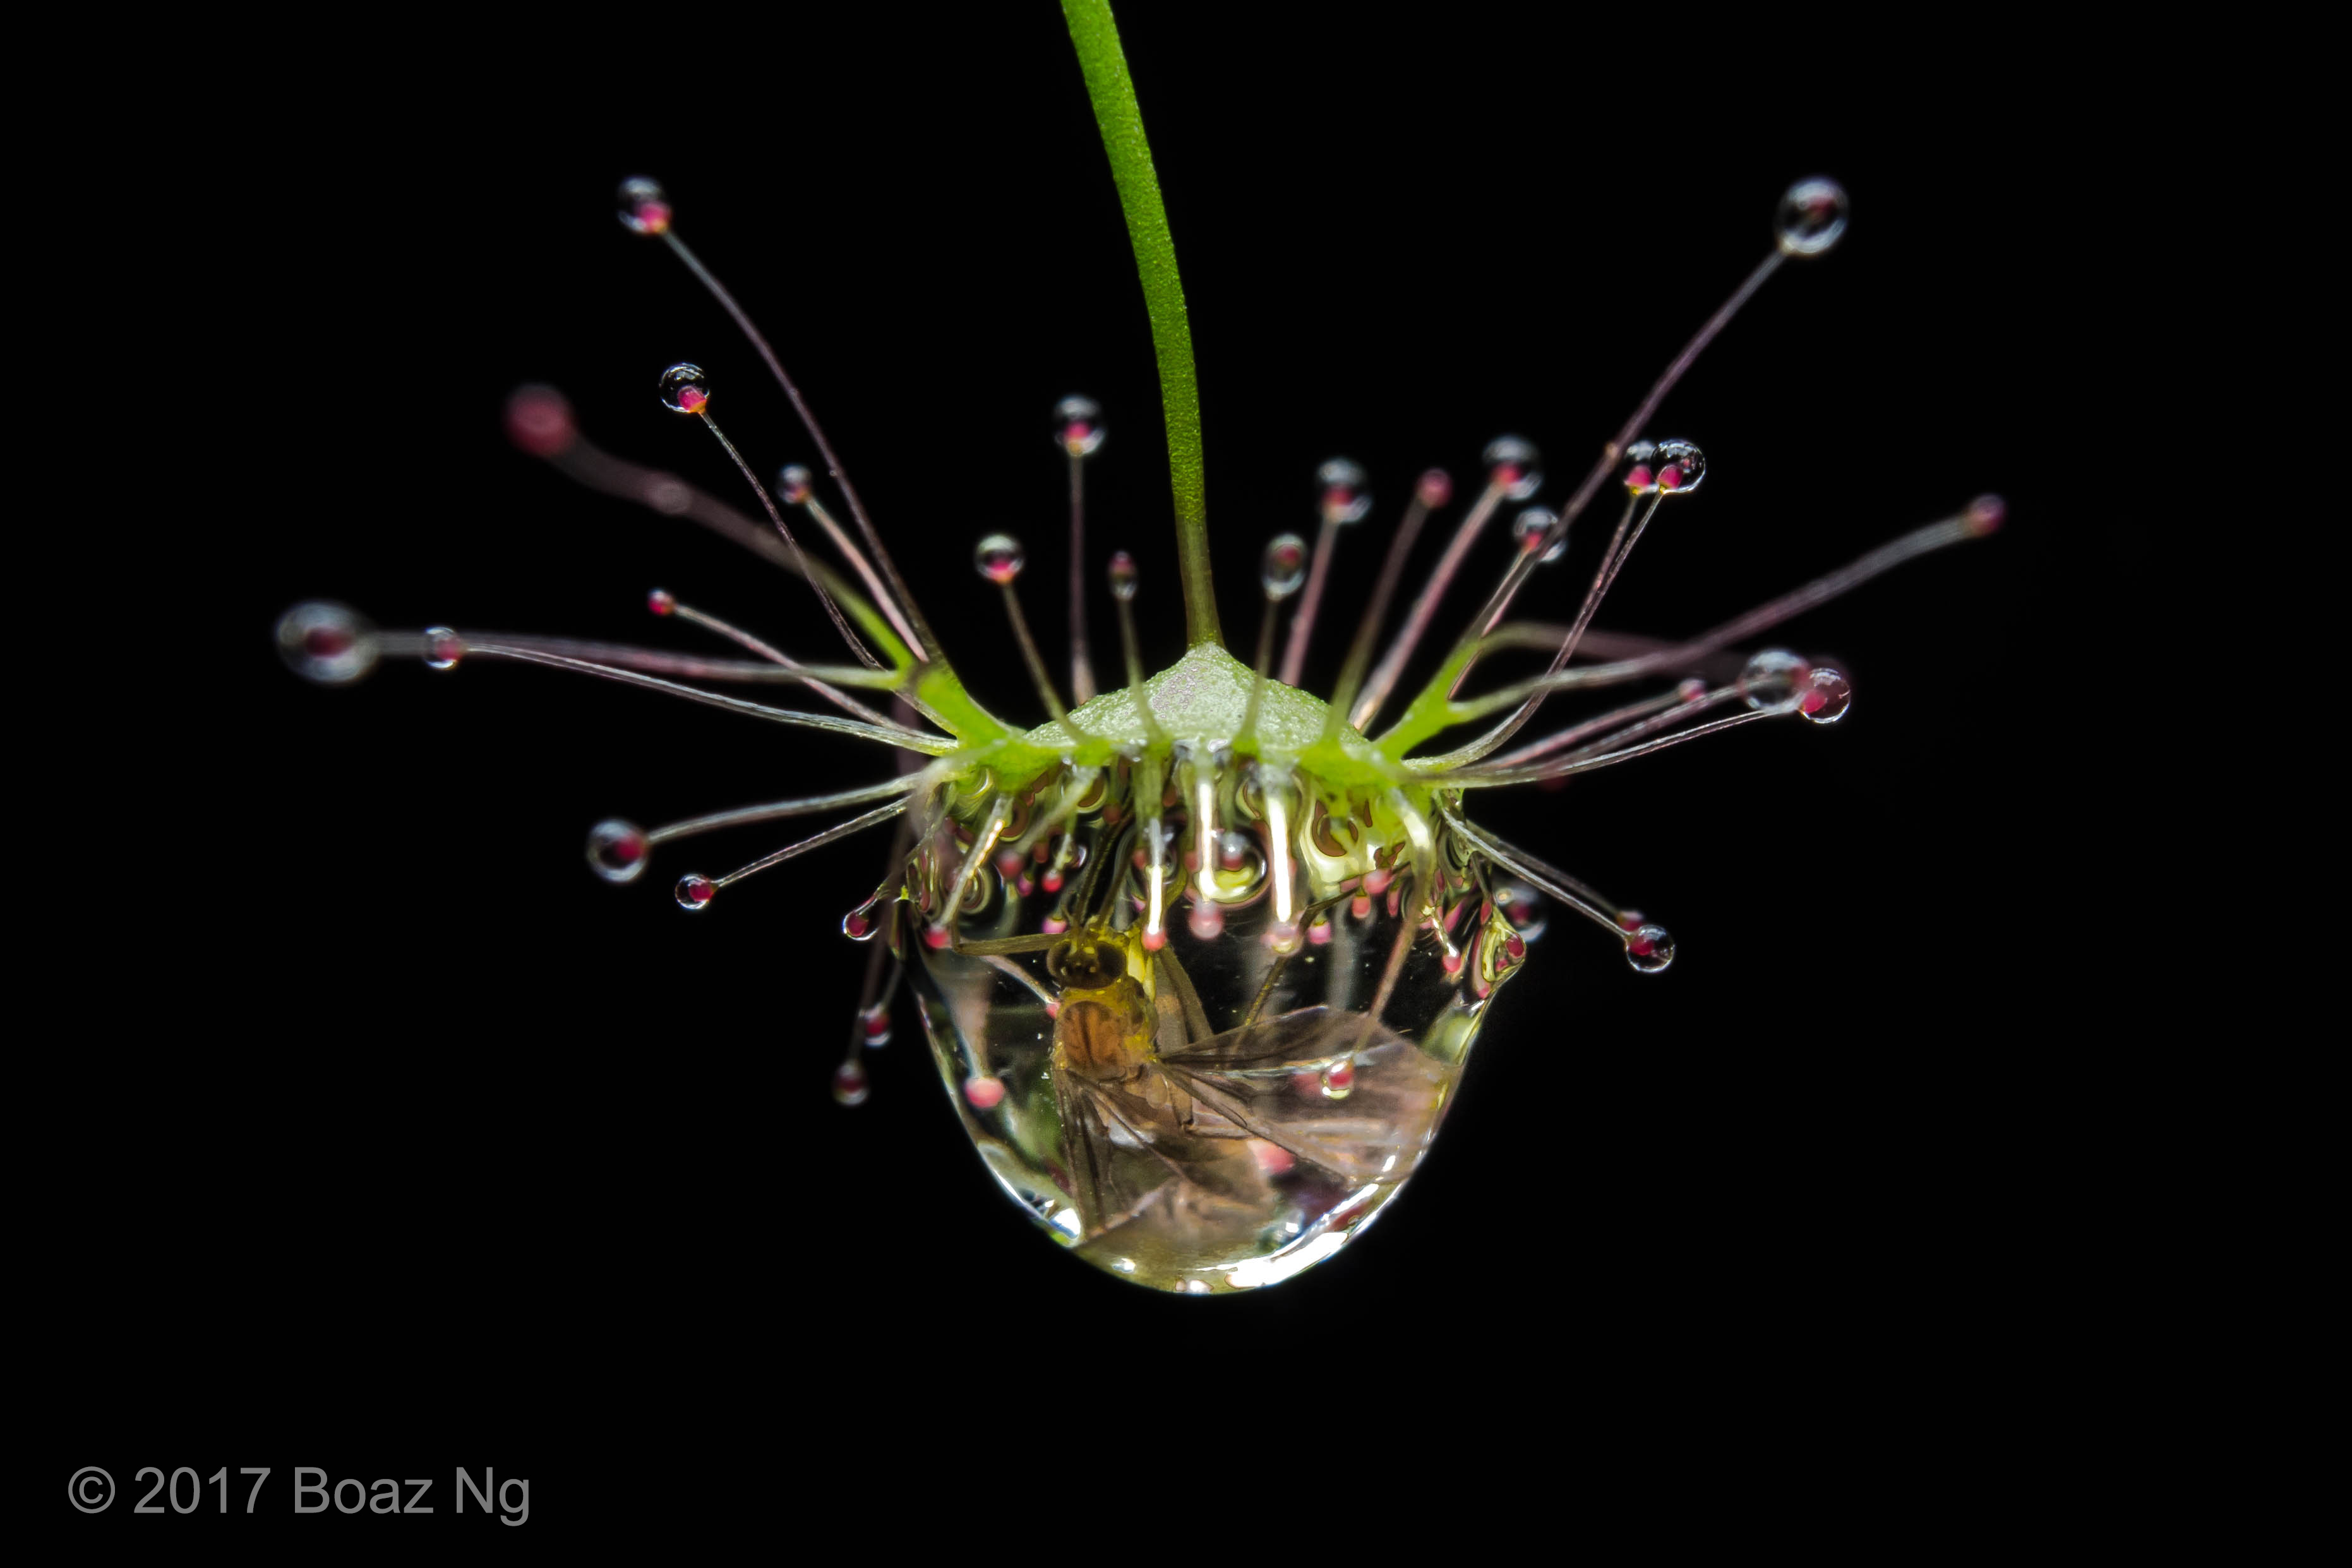 Taxonomy and Observations of the Drosera peltata complex